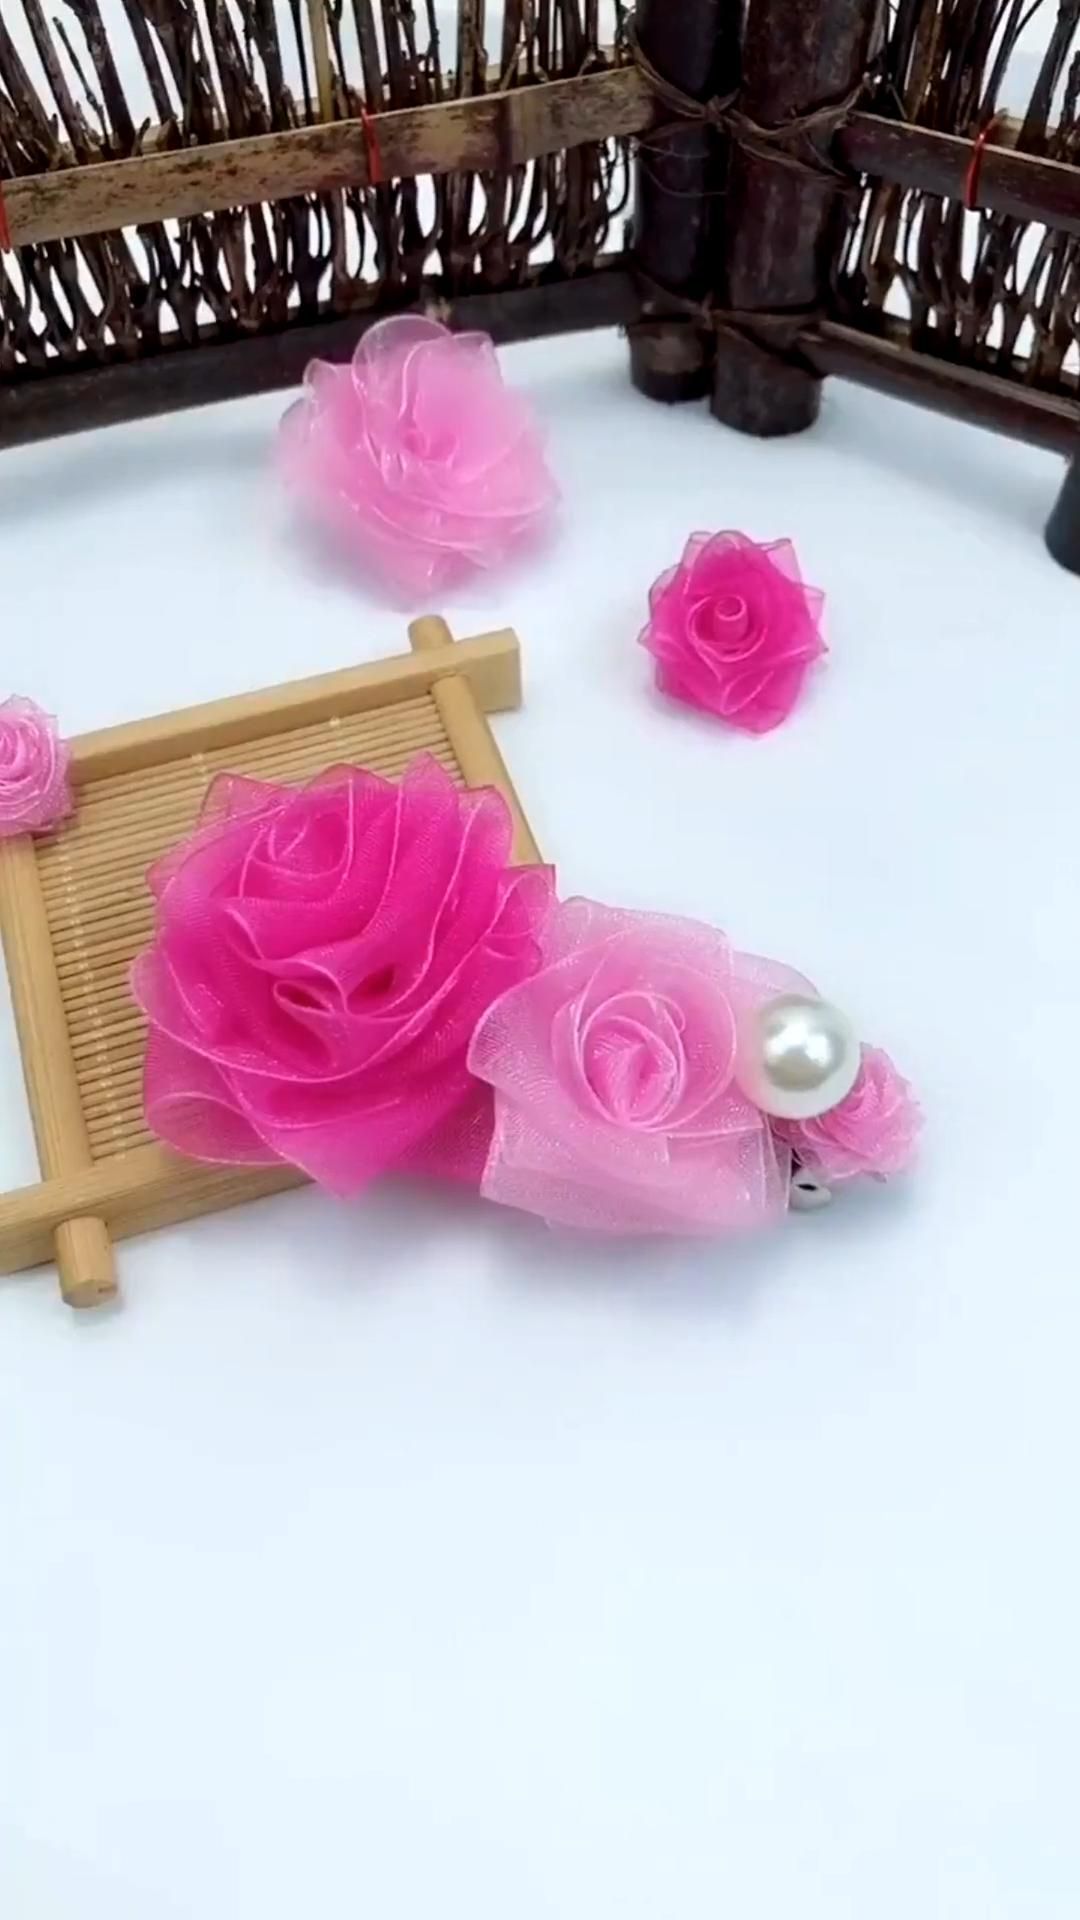 The Easy Way to Make Ribbon Flowers by Hand -   23 fabric crafts Videos tutorials ideas